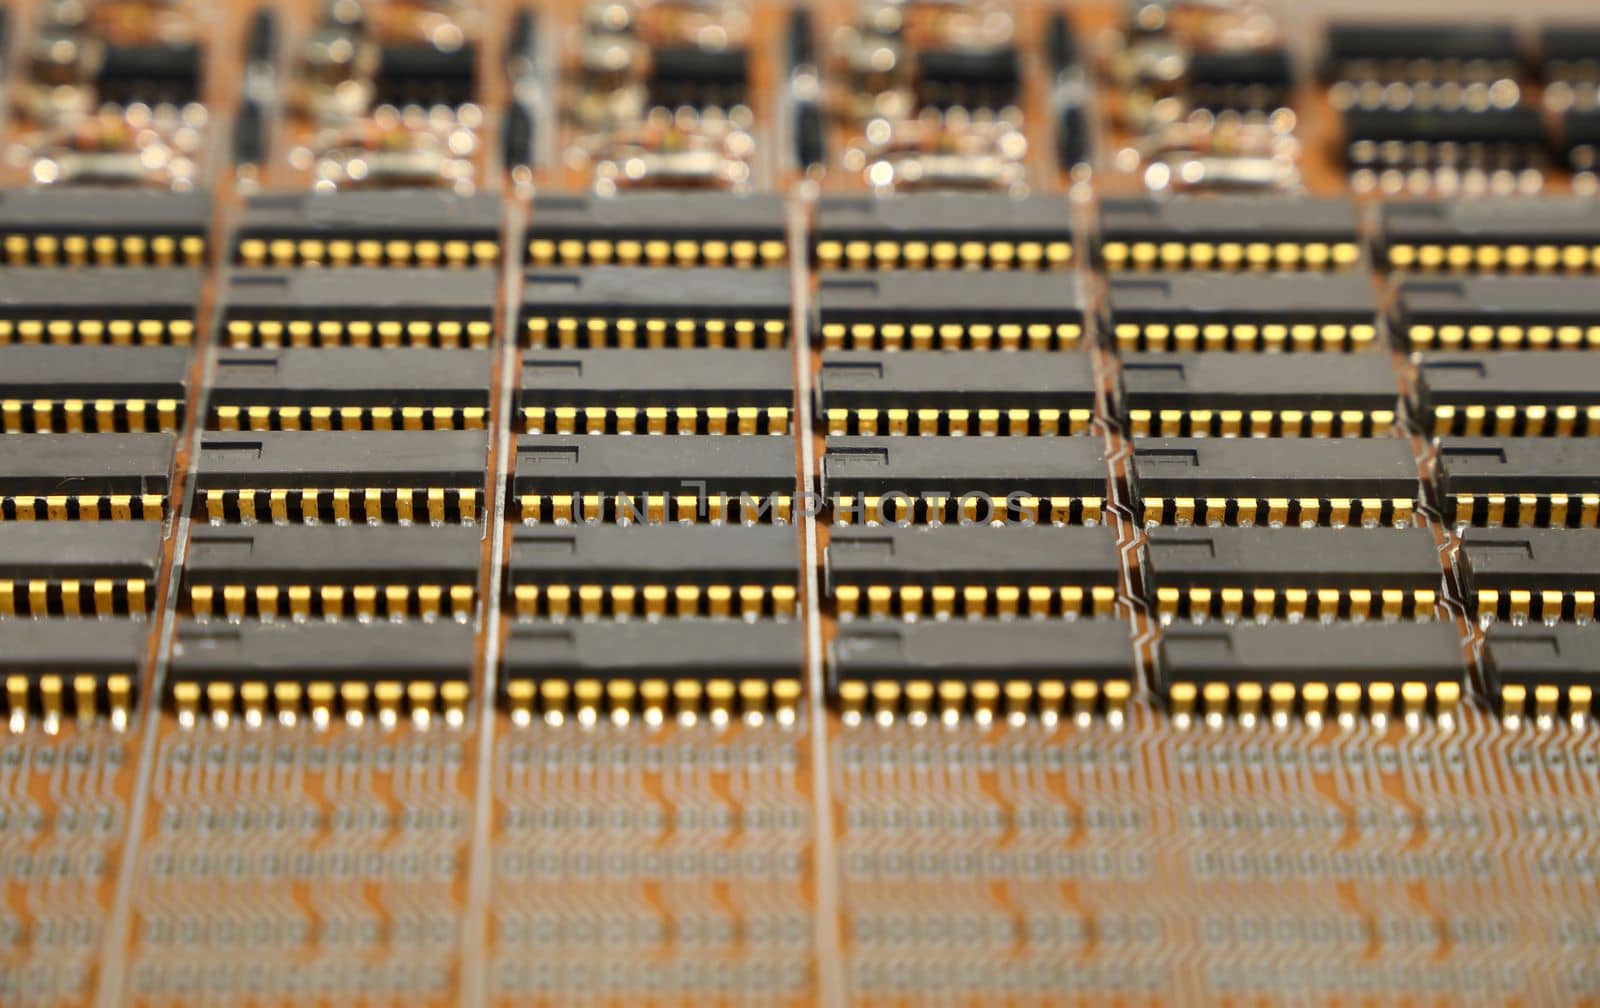 Vintage electronic circuit board with microprocessors and condensers, close up, macro shot